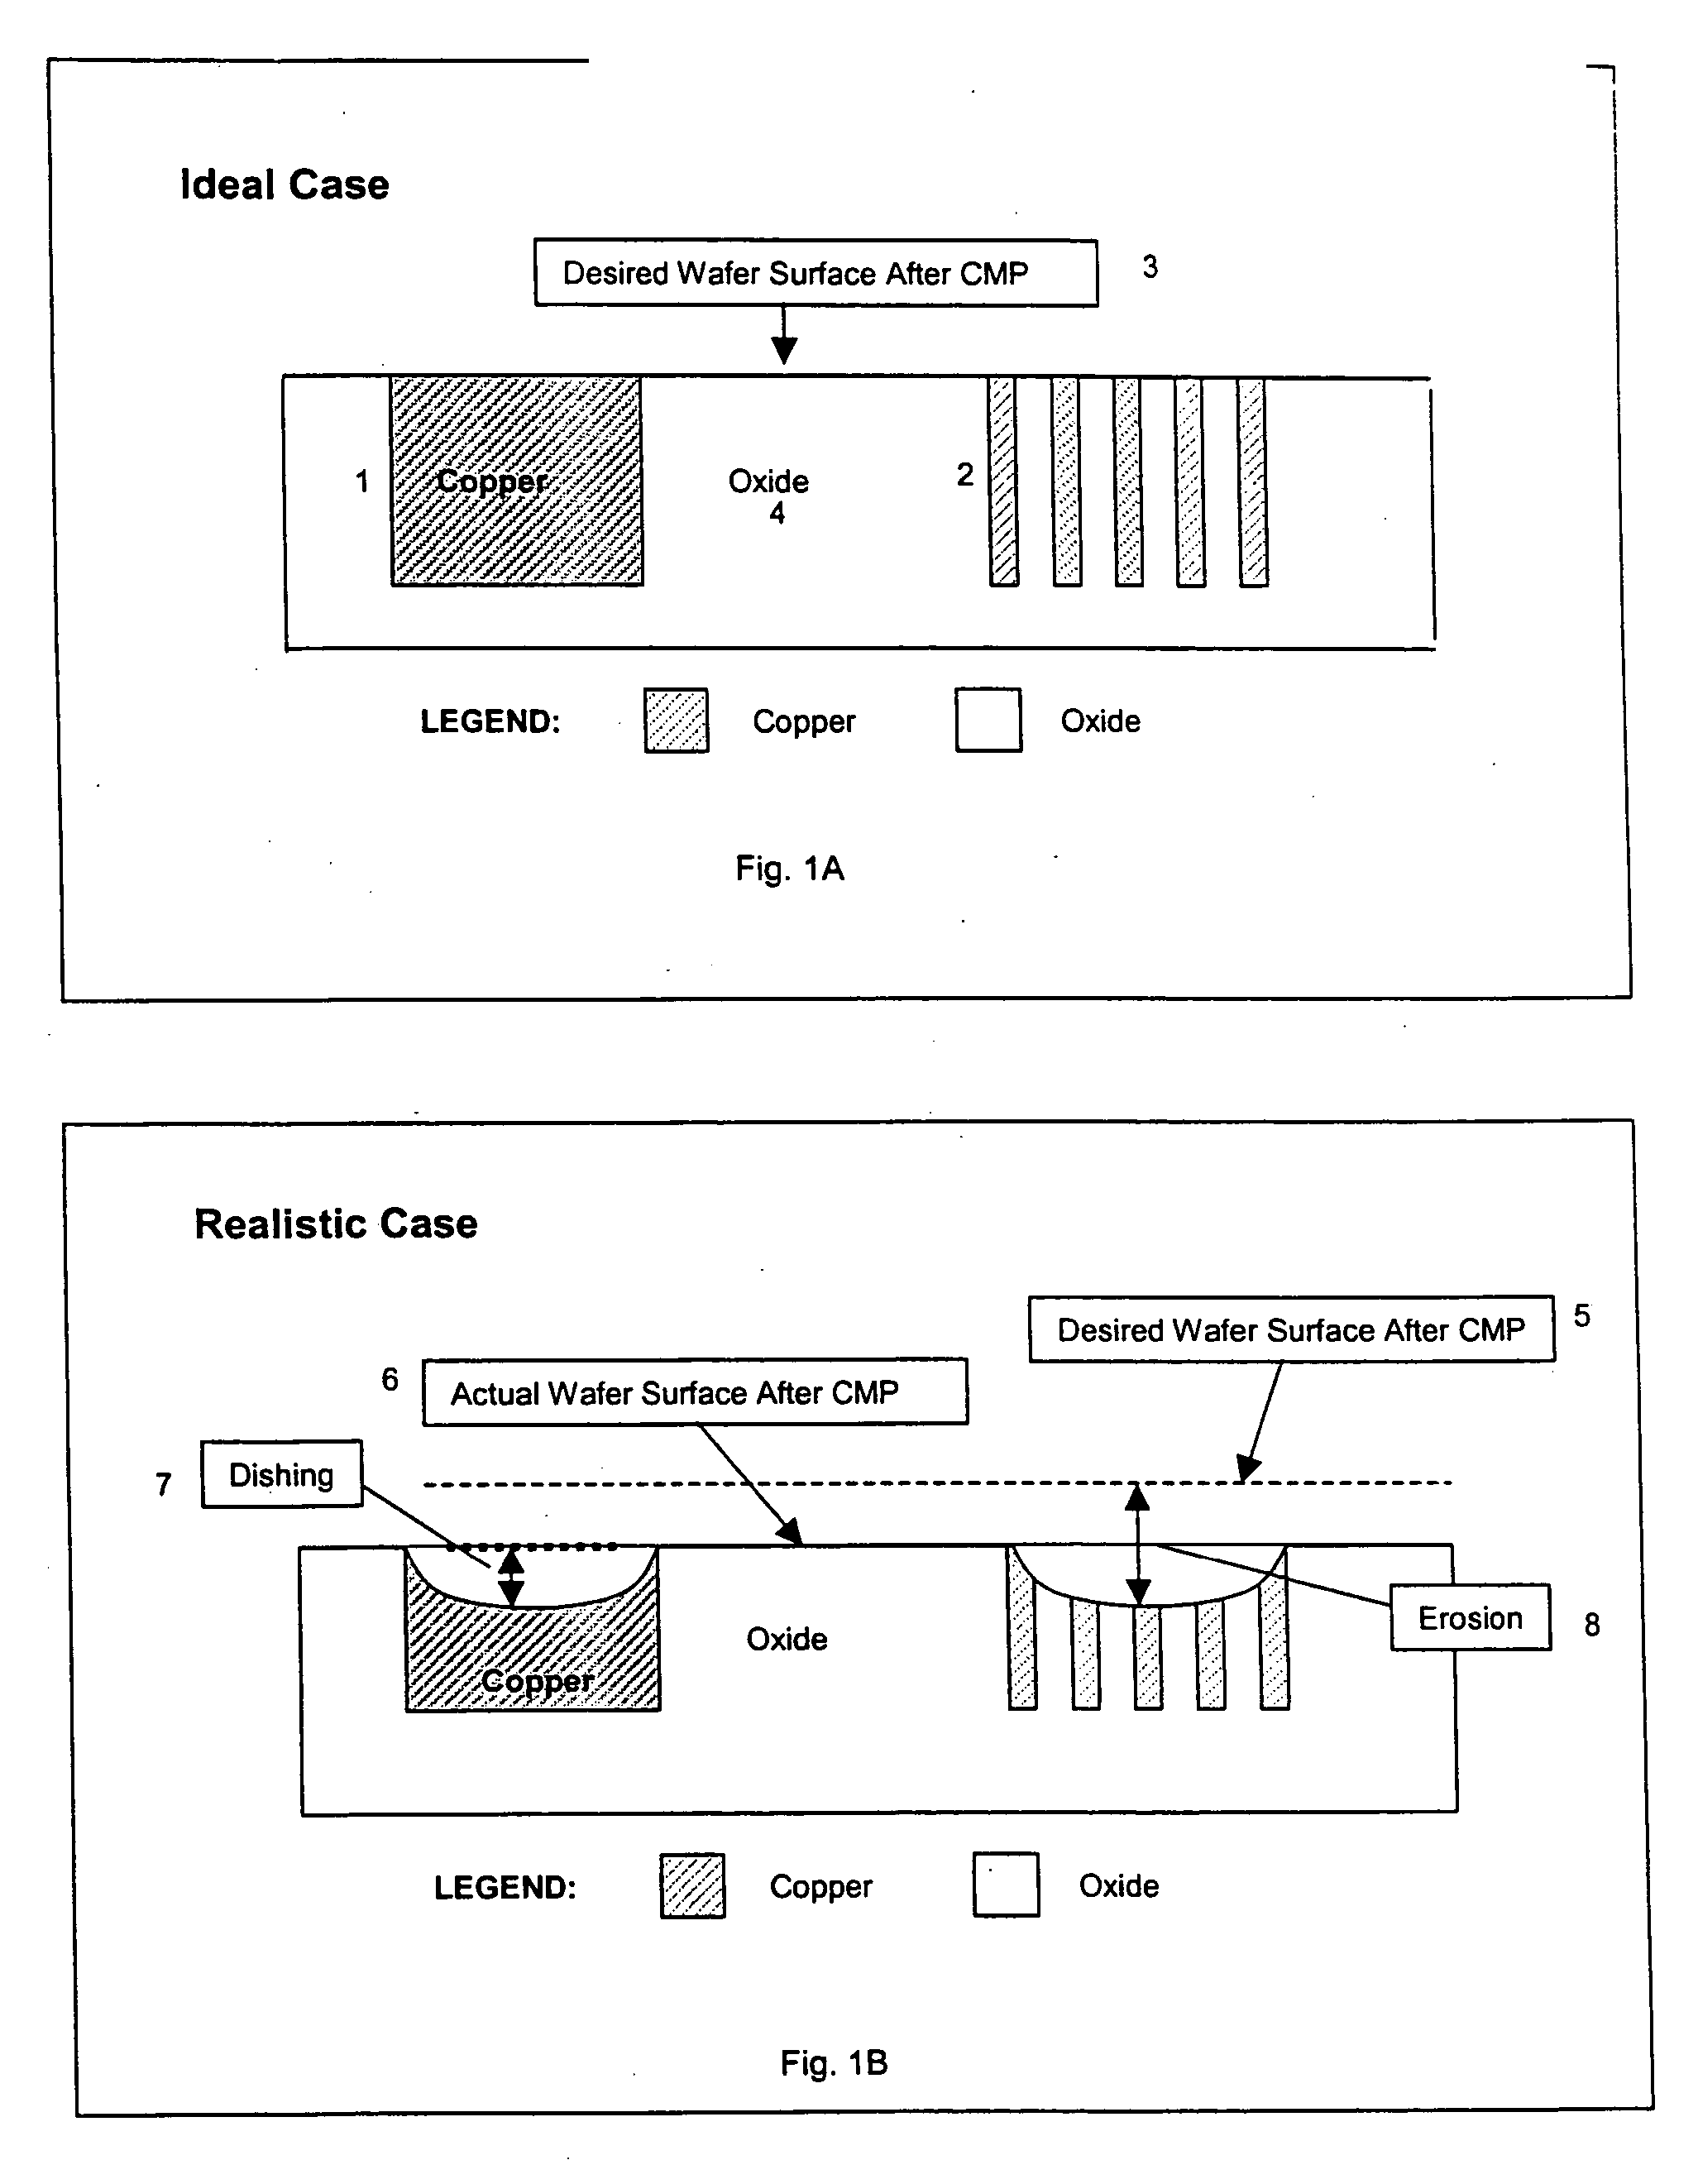 Dummy fill for integrated circuits